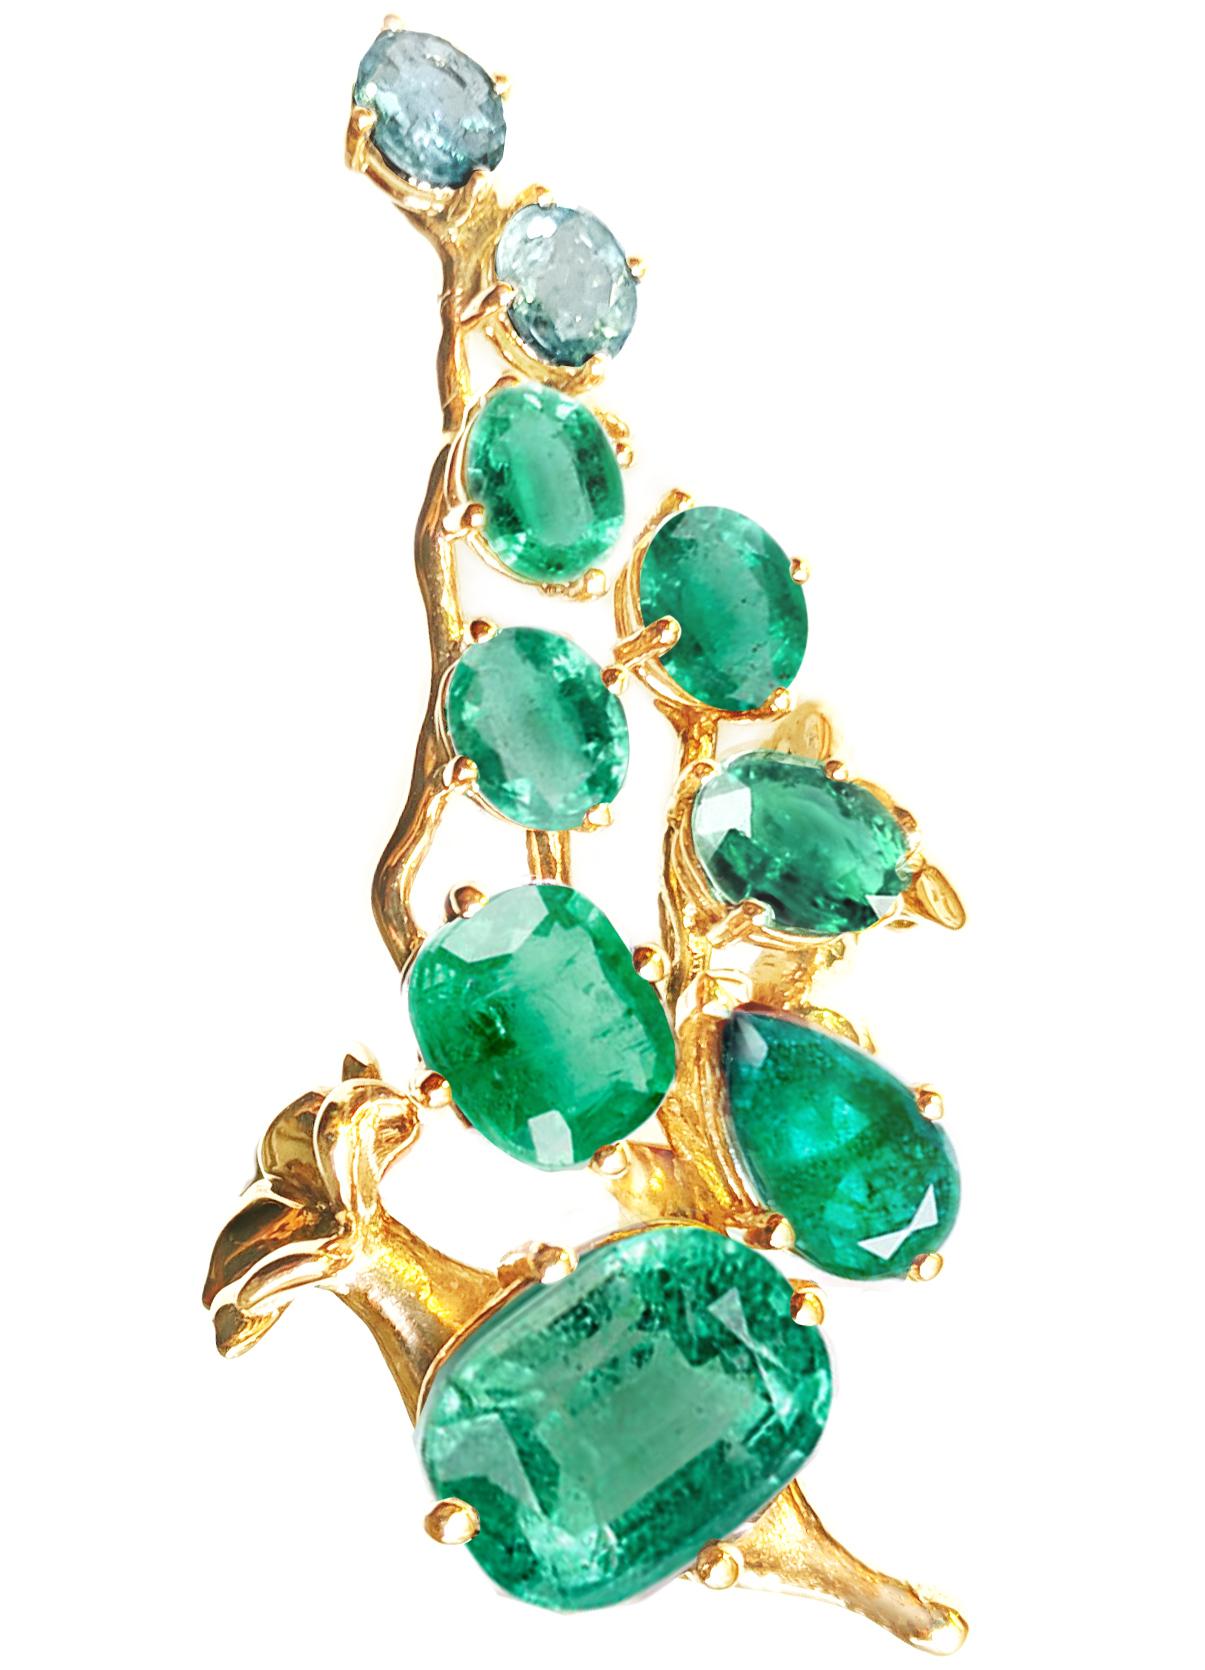 This Tobacco Flower contemporary cocktail ring is made of  18 karat yellow gold. This piece can be personally signed. It will be packed as a gift. 
The natural gems are:
Cushion cut emeralds 3,48 carats, 10,5x9 mm, and 1,37 carats, 8,4x6 mm.
Pear